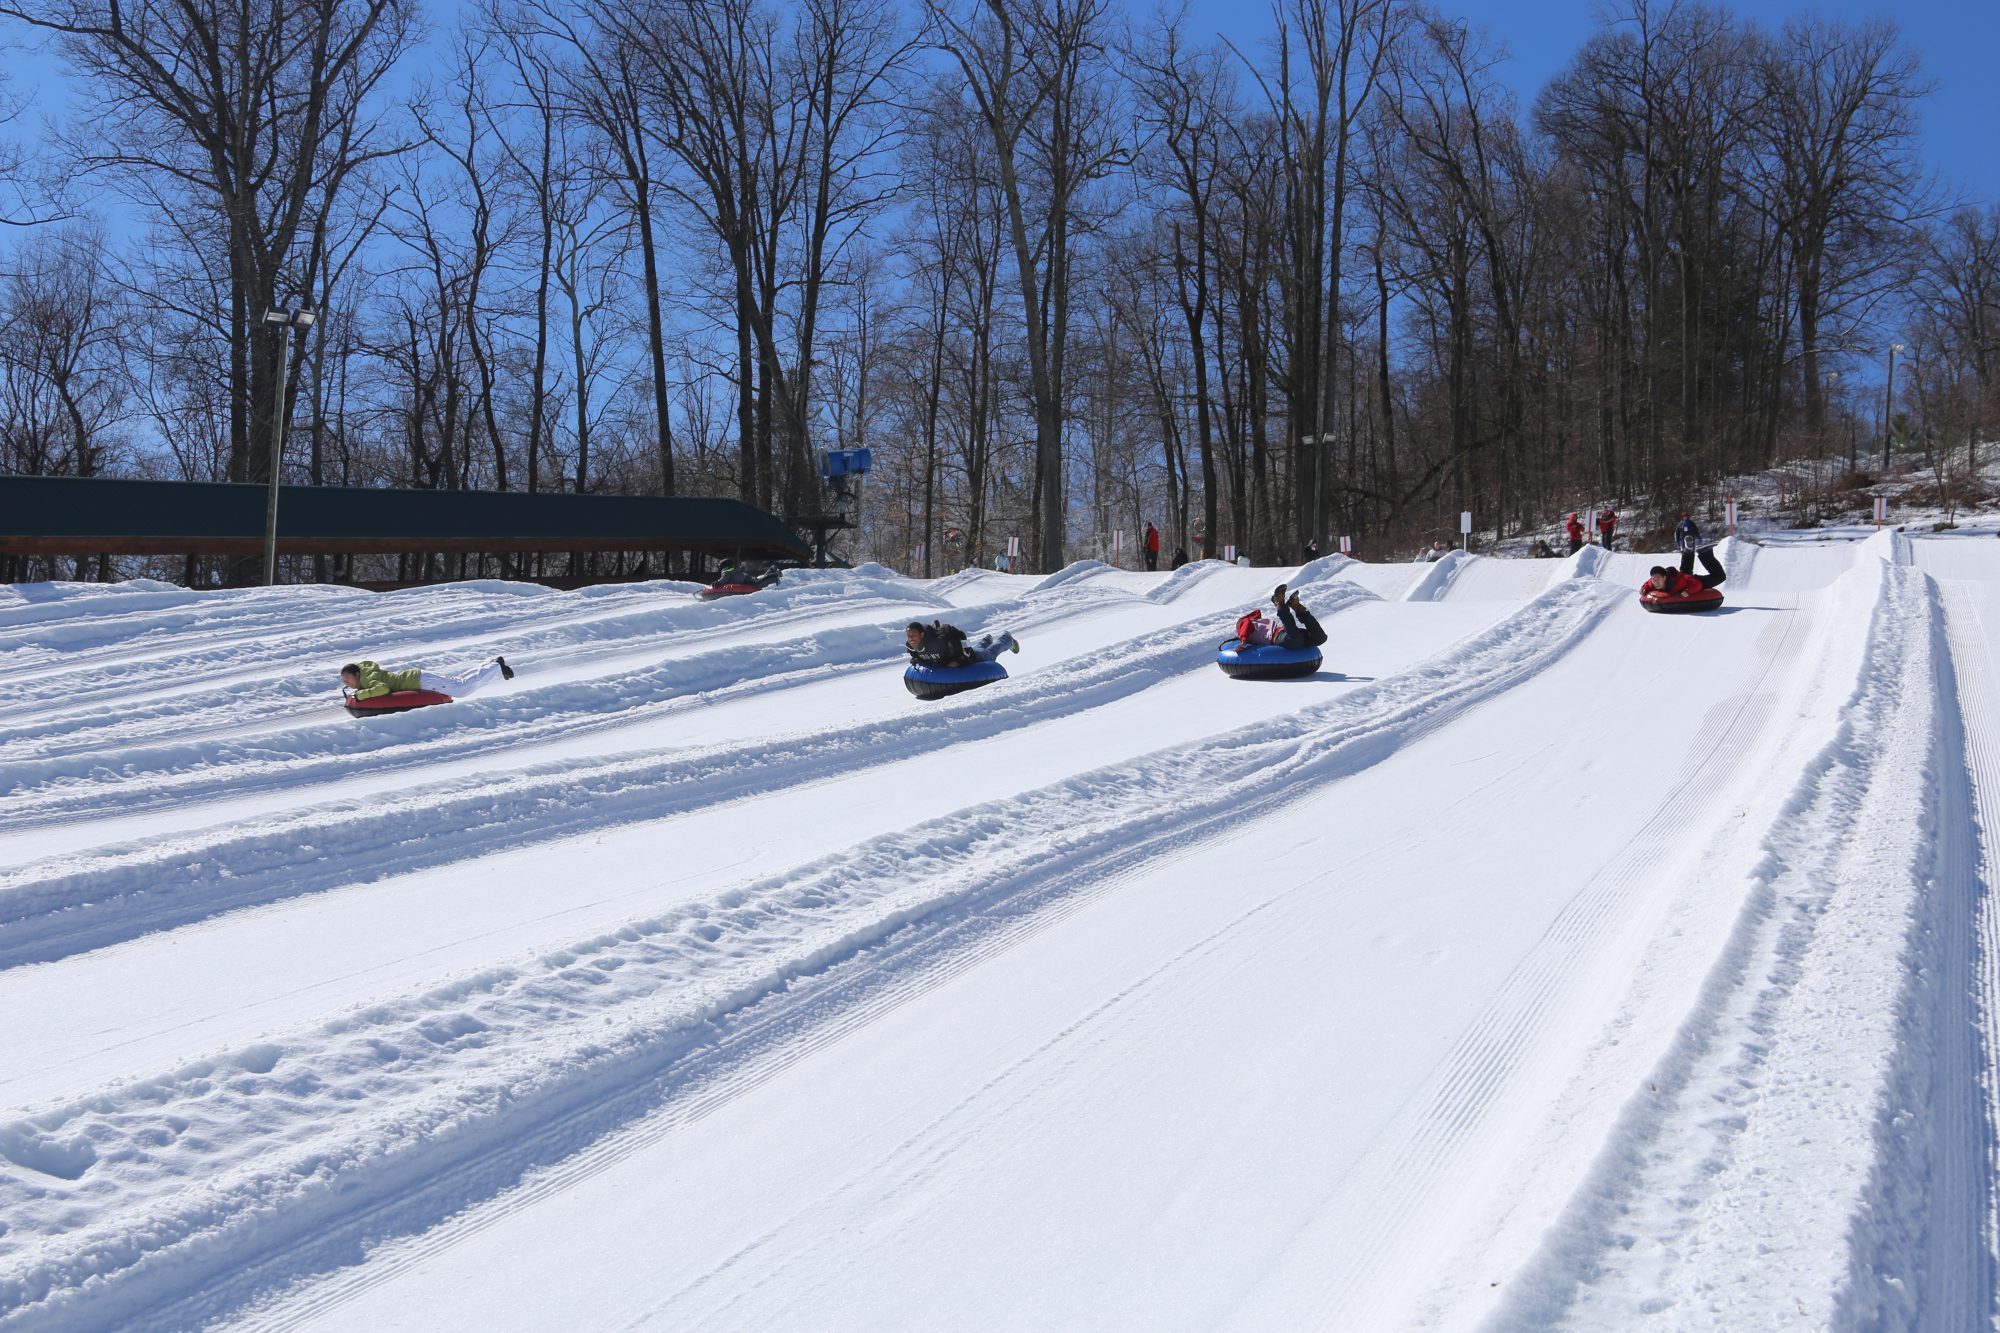 Tubing down the slopes. Peak Resorts Completes Acquisition of Snow Time. Peak Resorts photo. 